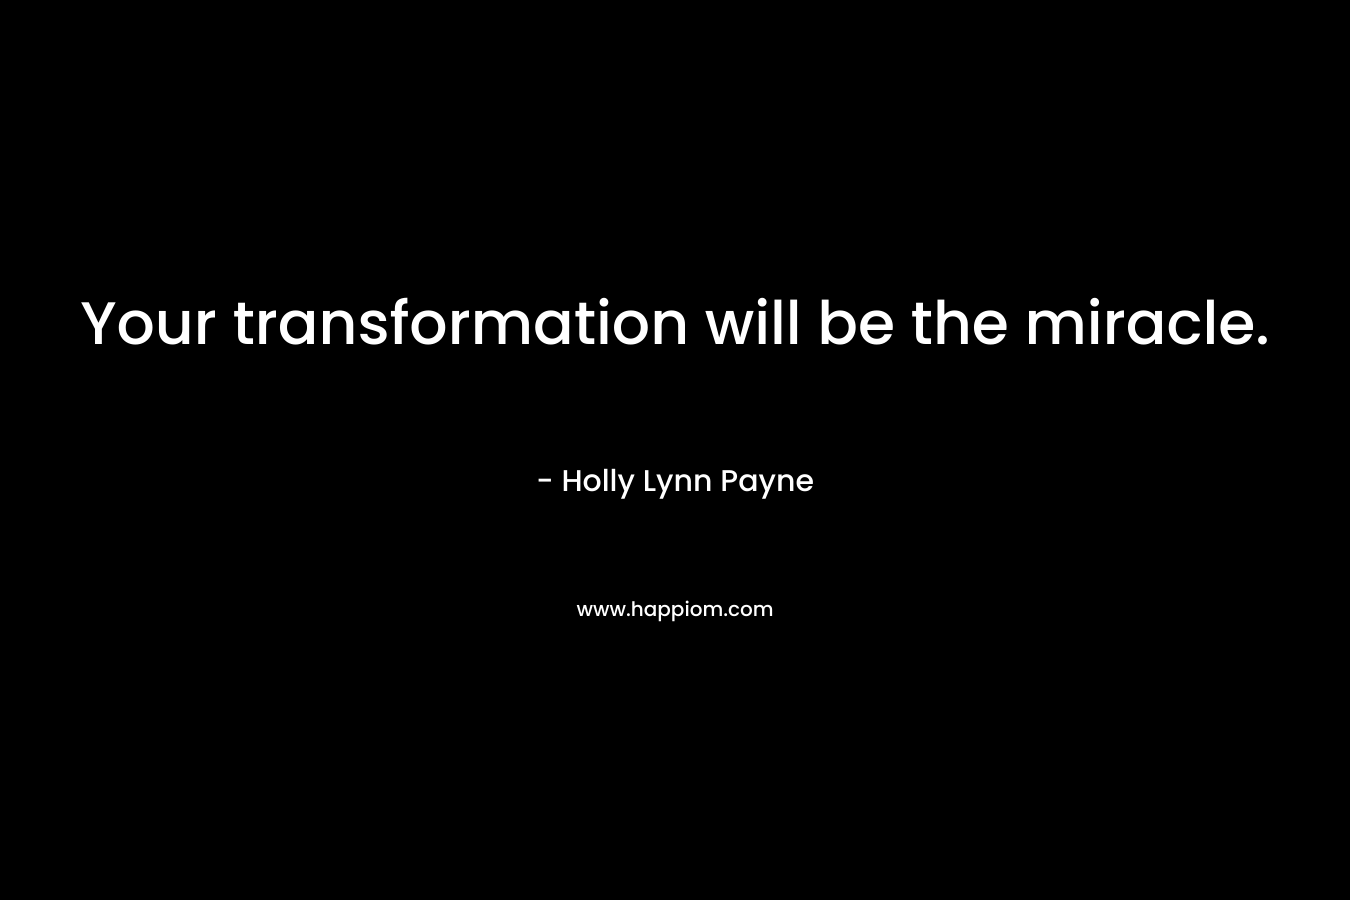 Your transformation will be the miracle. – Holly Lynn Payne